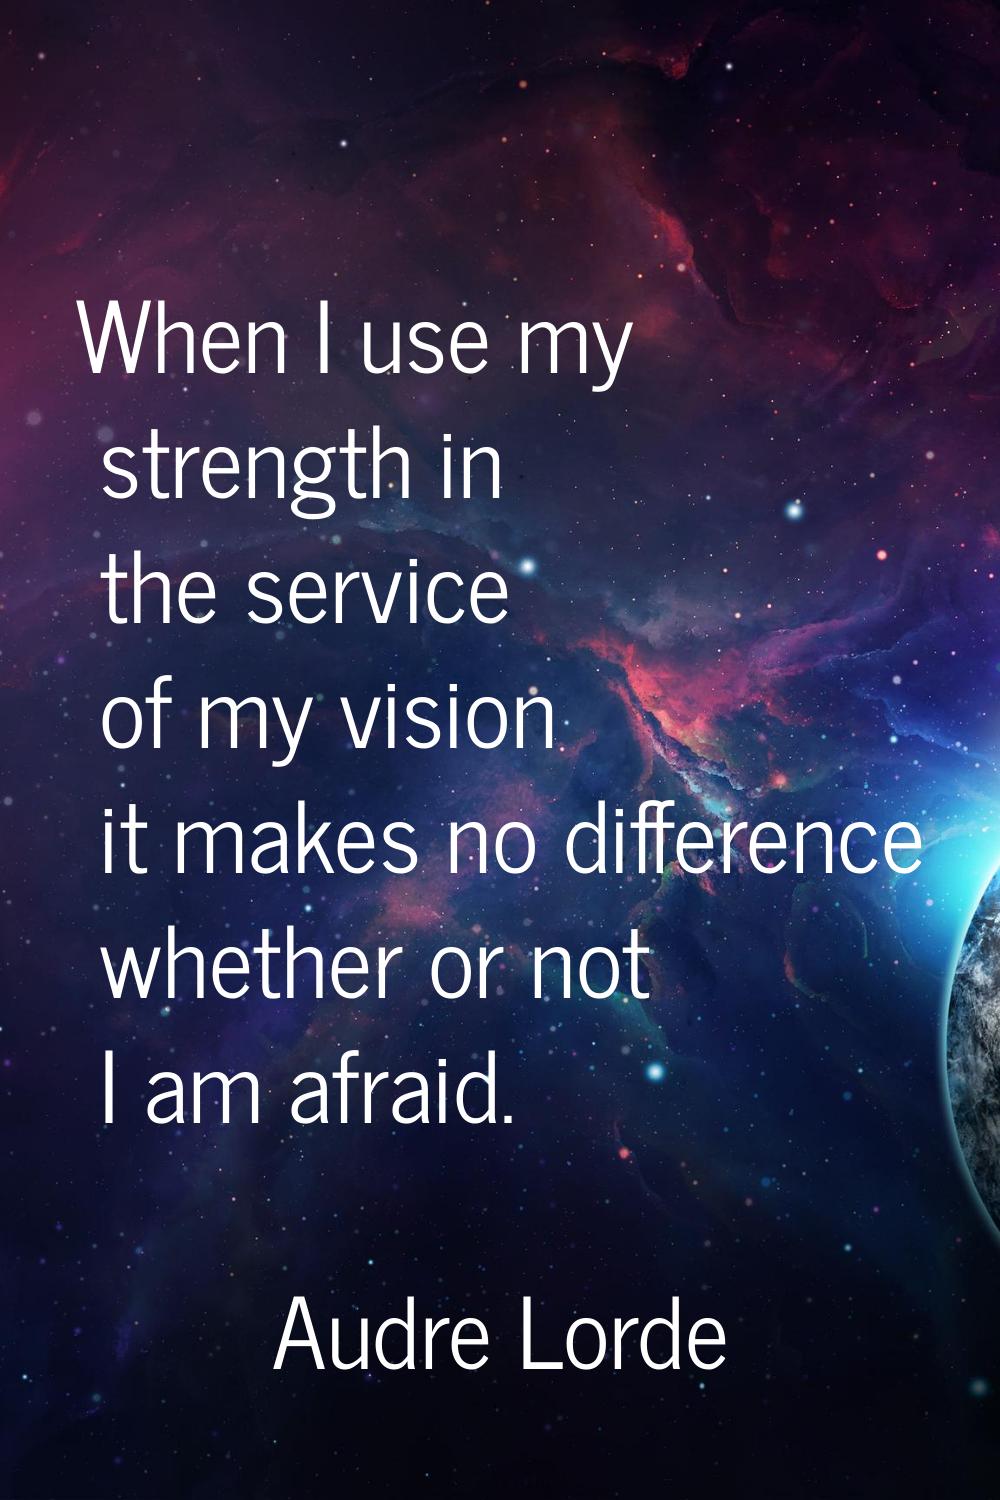 When I use my strength in the service of my vision it makes no difference whether or not I am afrai